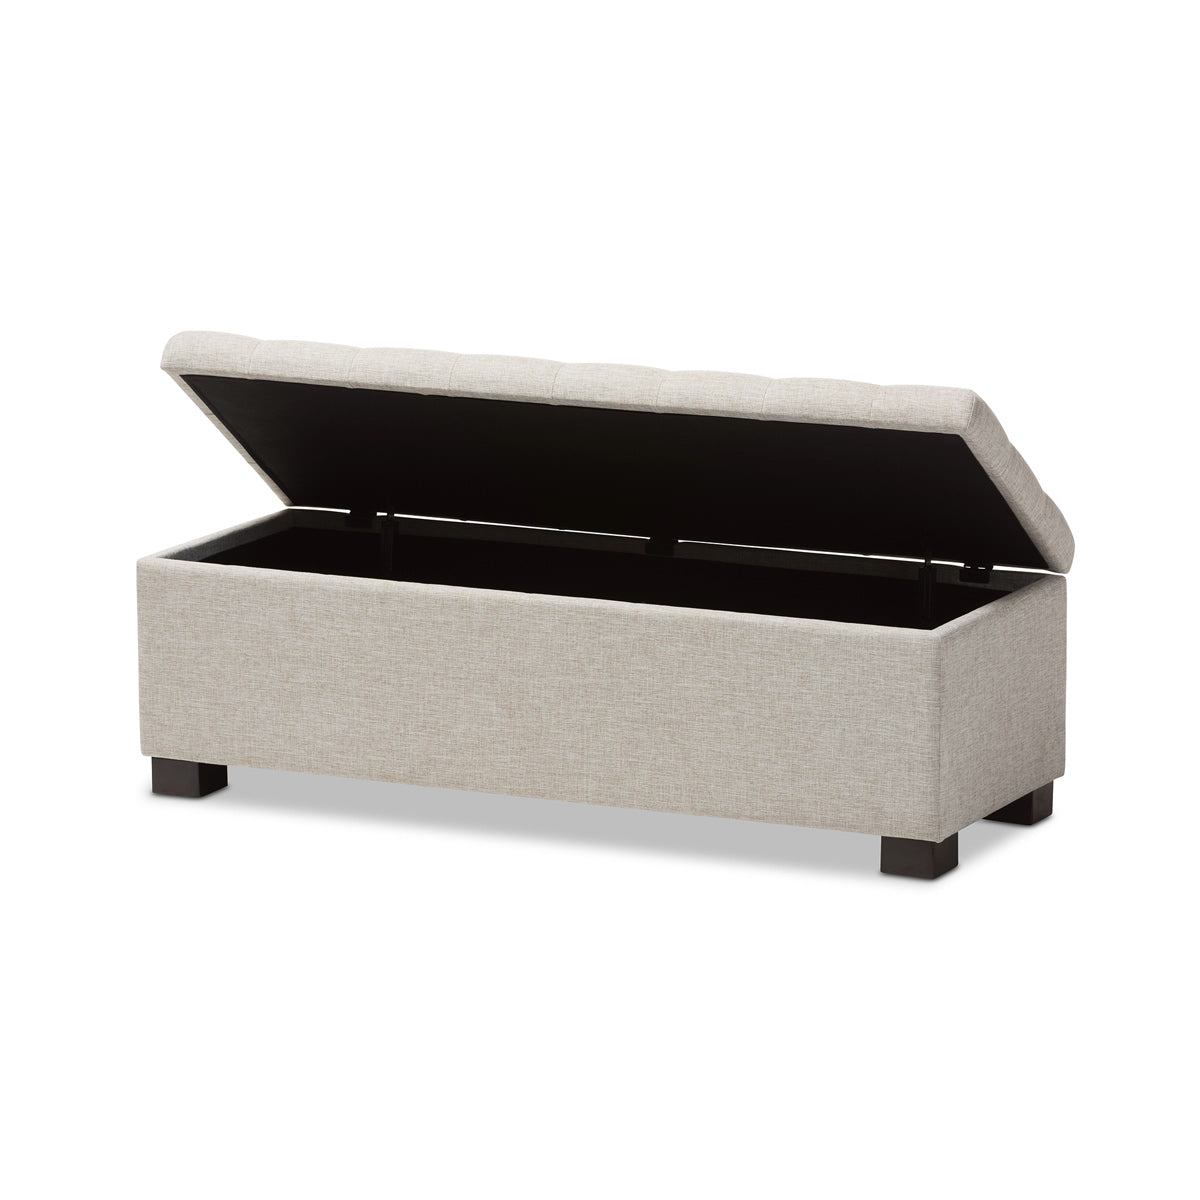 Baxton Studio Roanoke Modern and Contemporary Beige Fabric Upholstered Grid-Tufting Storage Ottoman Bench Baxton Studio-benches-Minimal And Modern - 3